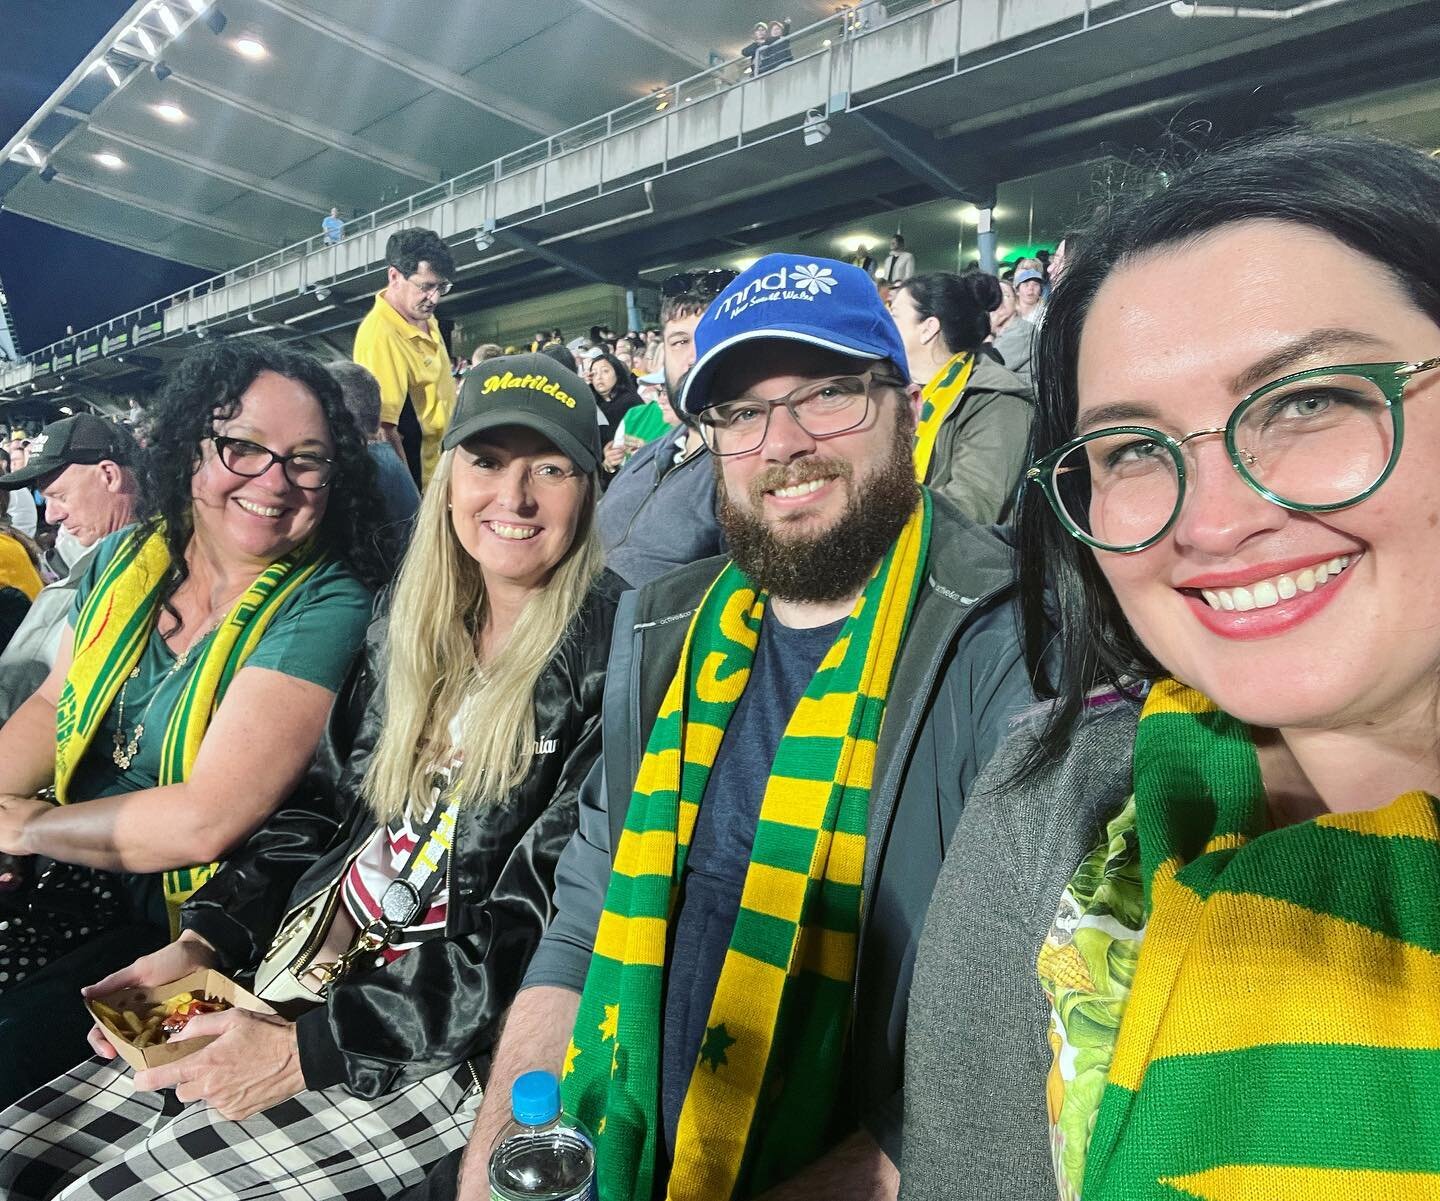 #matildas with the bay 4 crew 

Image: 4 smiling humans in green and gold get up sitting in a football stadium.